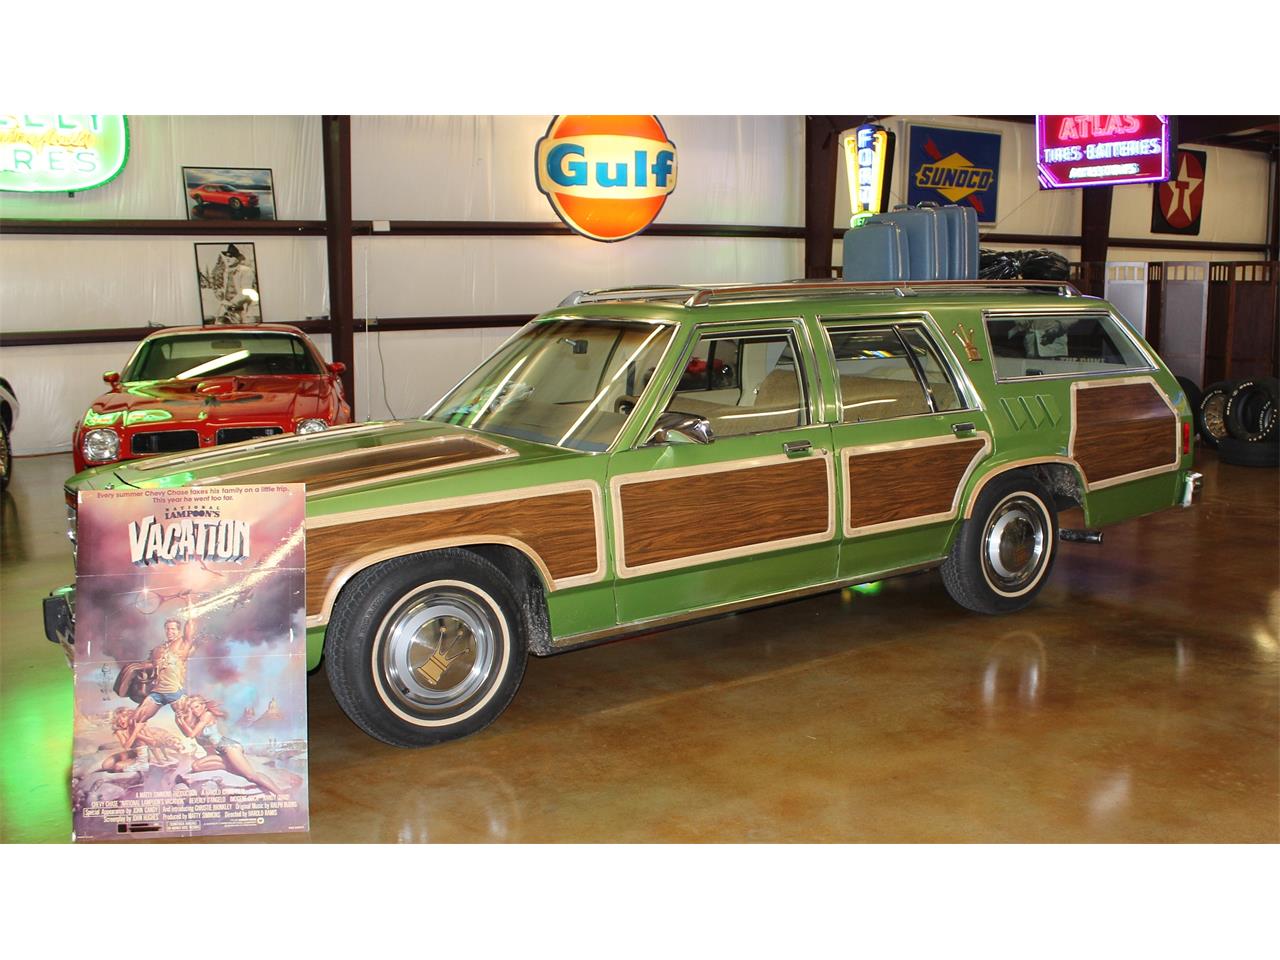  Wagon Queen Family Truckster - National Lampoon's